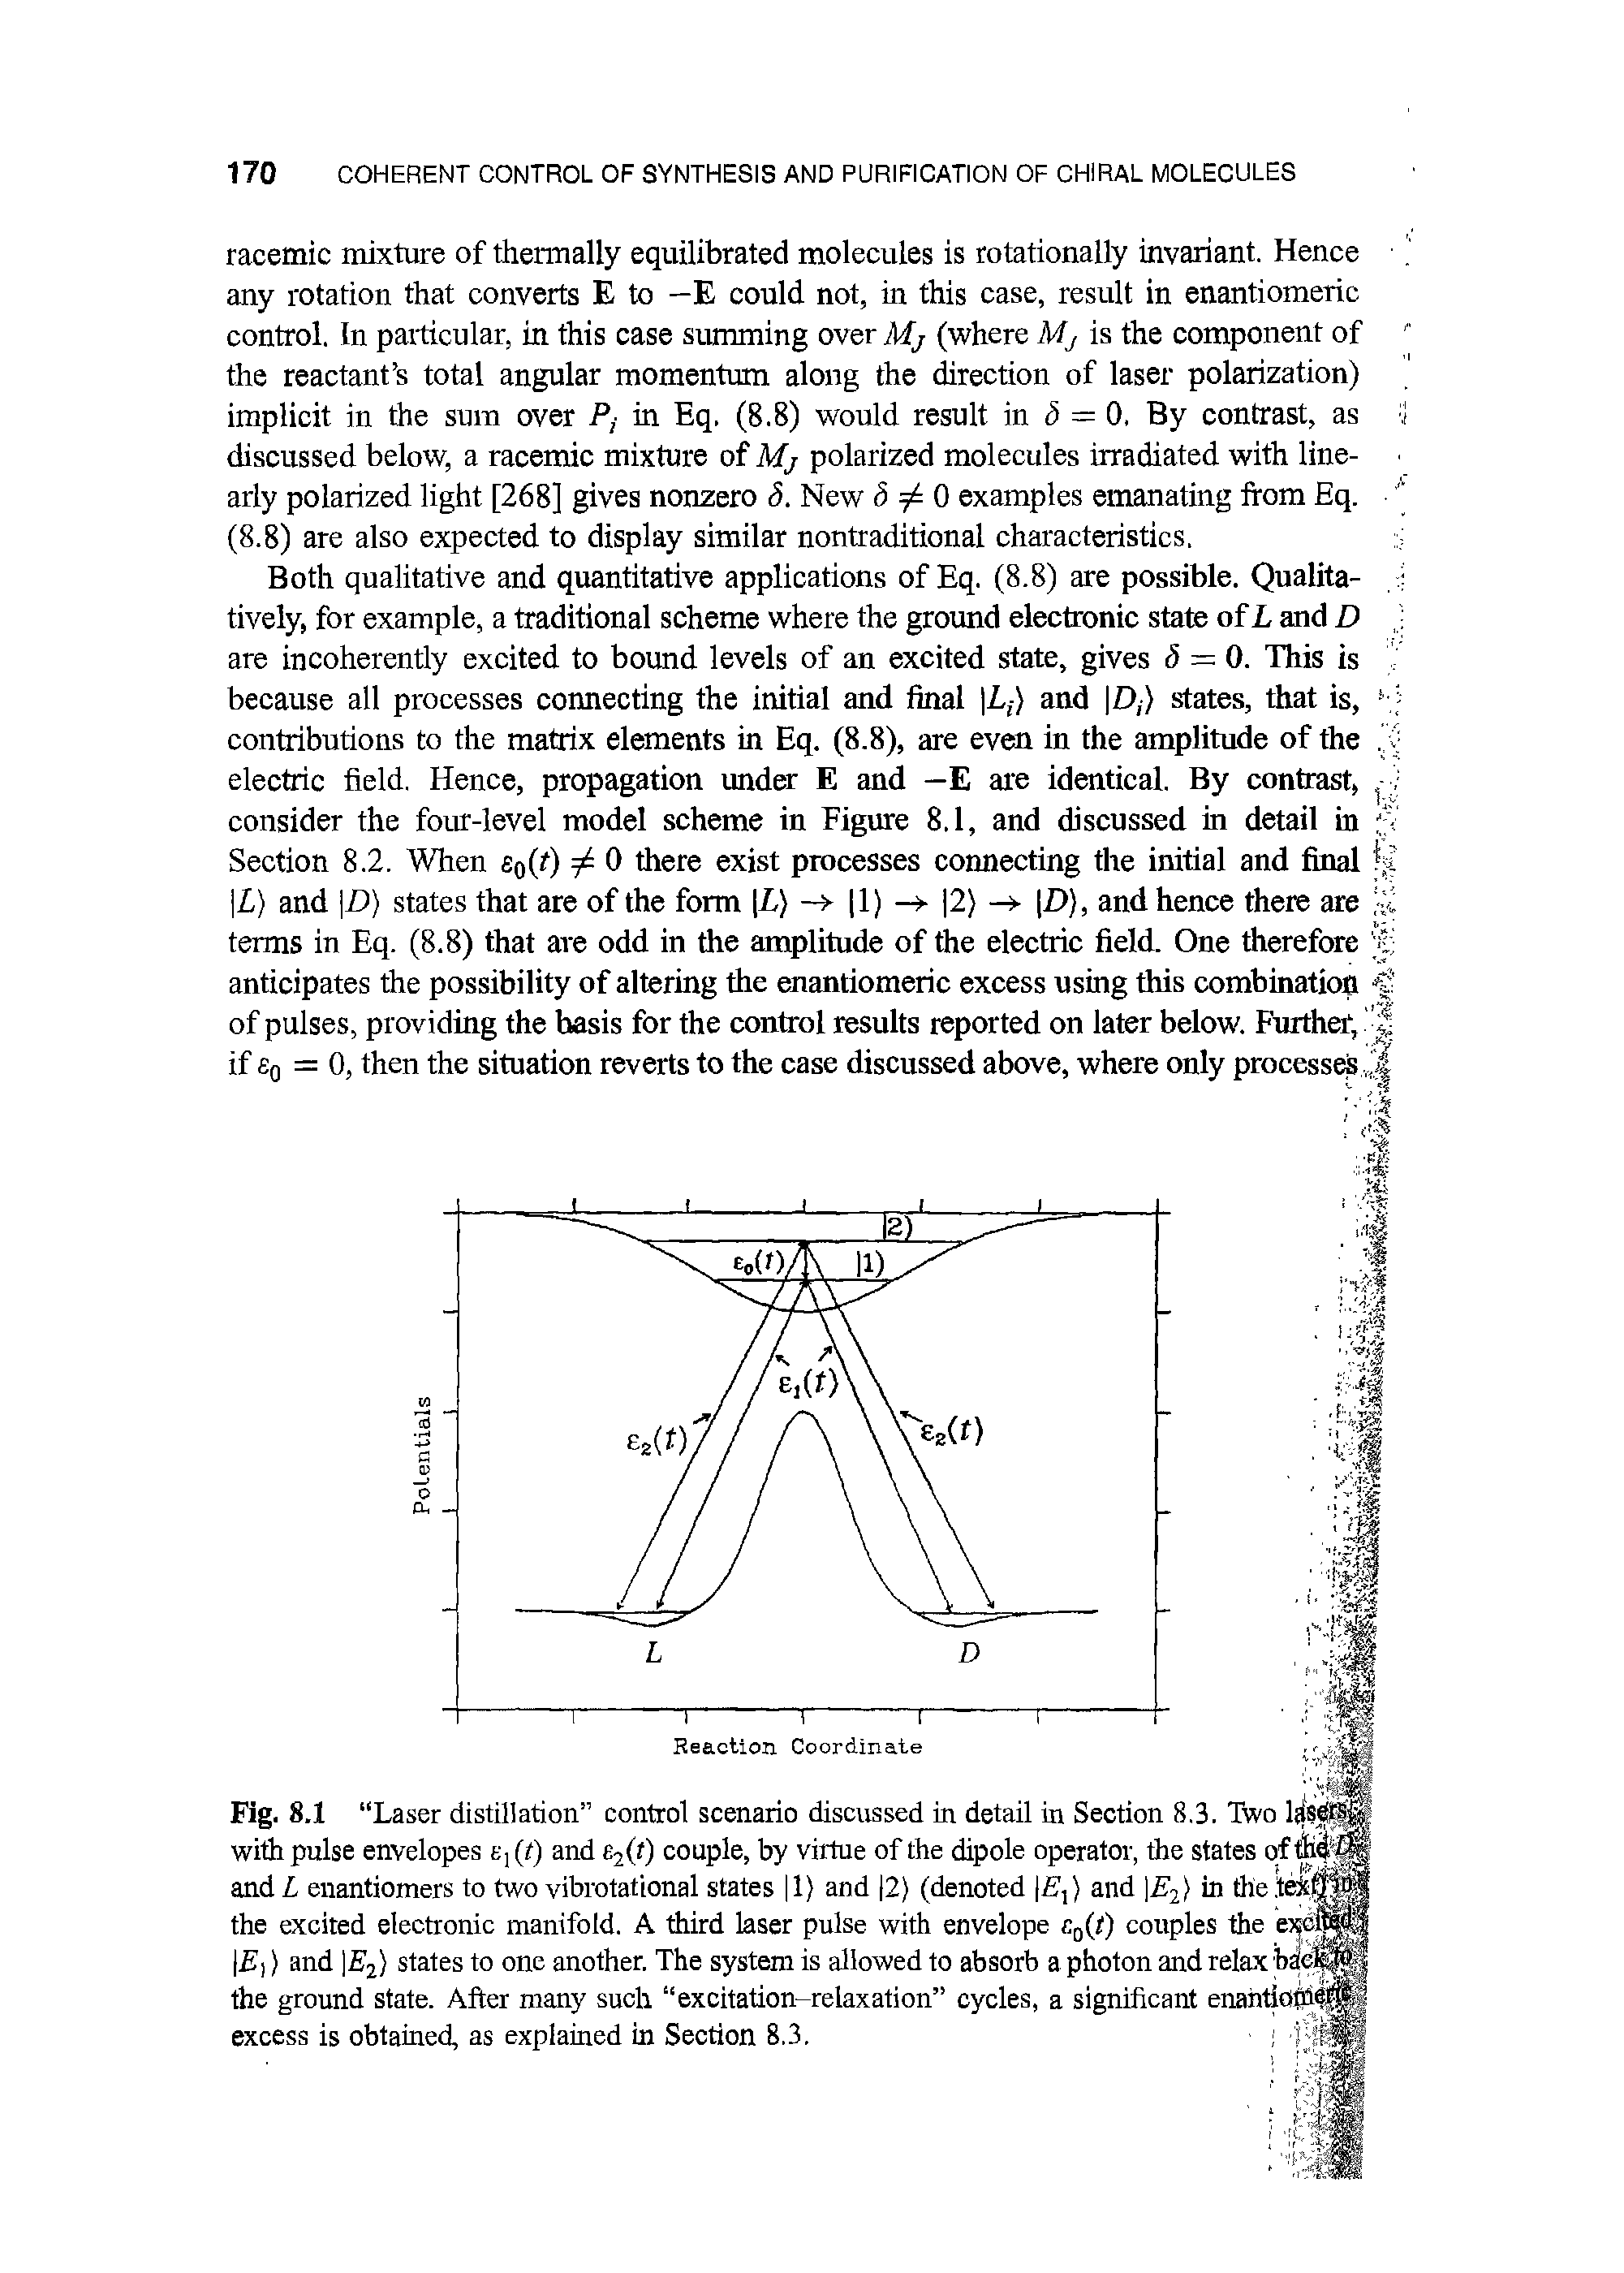 Fig. 8.1 Laser distillation control scenario discussed in detail in Section 8.3. Two ljtsfi with pulse envelopes ,(0 and e2(0 couple, by virtue of the dipole operator, the states and L enantiomers to two vibrotational states 1) and 2) (denoted If ,) and E2) in the.t i the excited electronic manifold. A third laser pulse with envelope r.0(i) couples the ex E)) and E2) states to one another. The system is allowed to absorb a photon and relax hack the ground state. After many such excitation-relaxation cycles, a significant cnantionneh excess is obtained, as explained in Section 8.3. ...